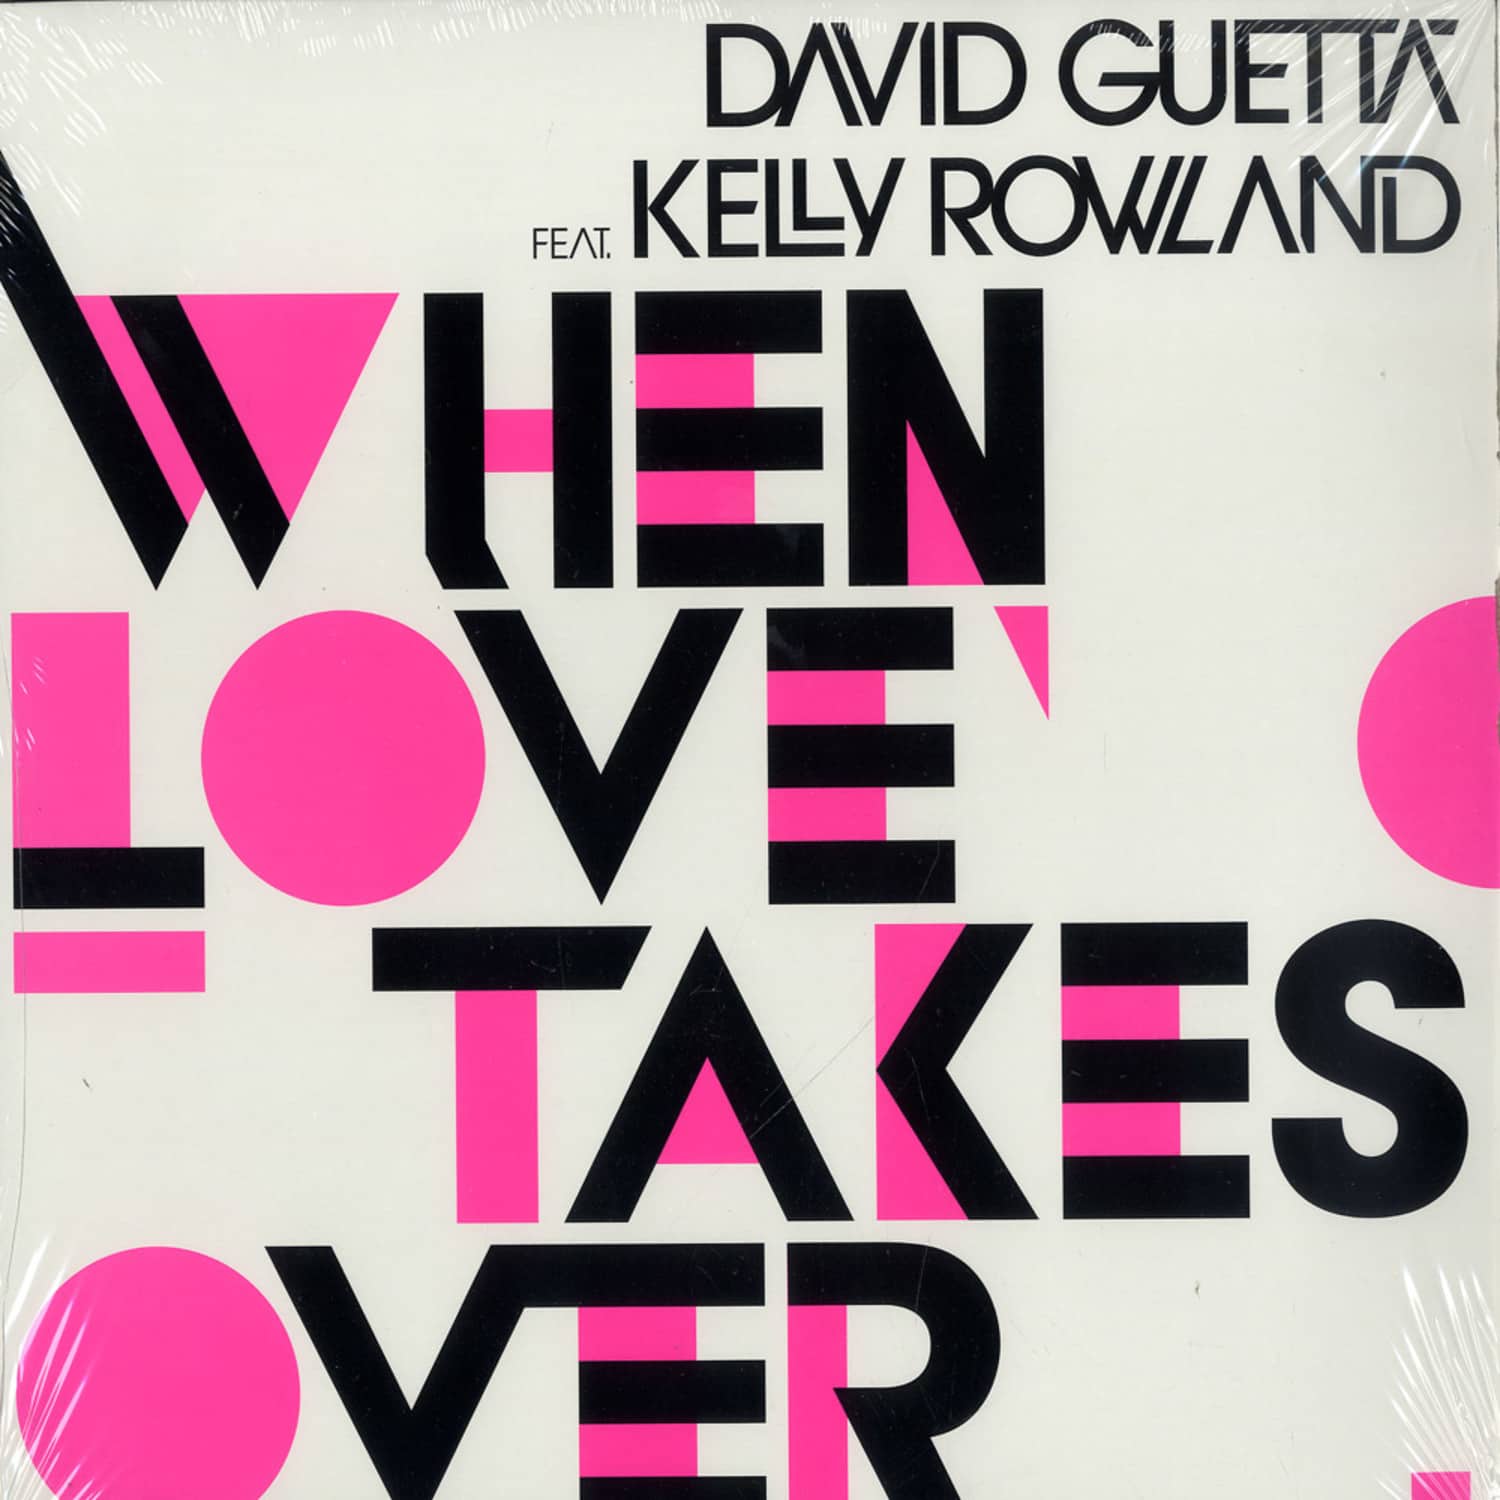 David Guetta ft. Kelly Rowland - WHEN LOVE TAKES OVER 